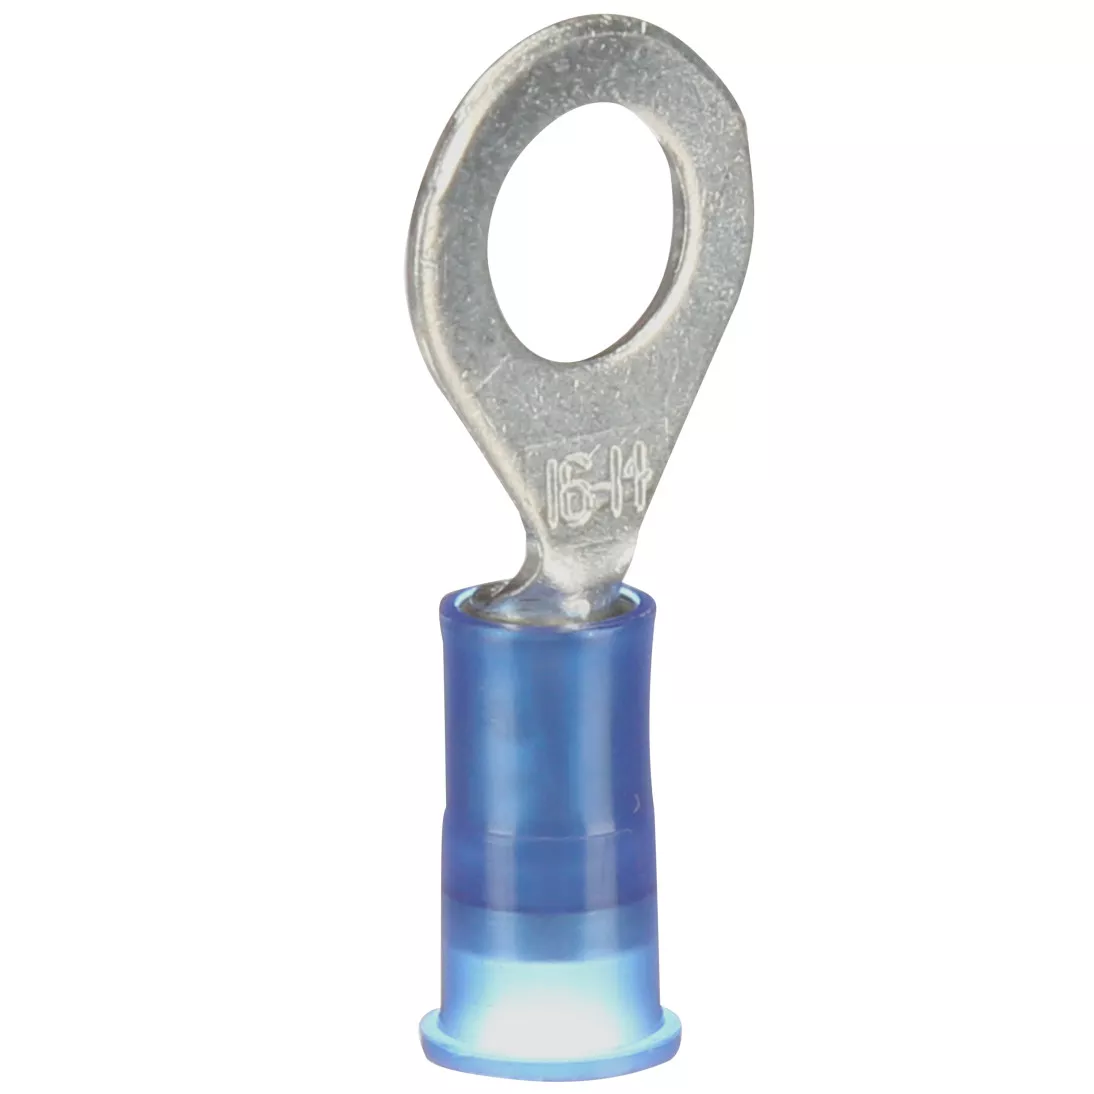 3M™ Scotchlok™ Ring Nylon Insulated, 100/bottle, MNG14-516R/SX,
standard-style ring tongue fits around the stud, 500/Case